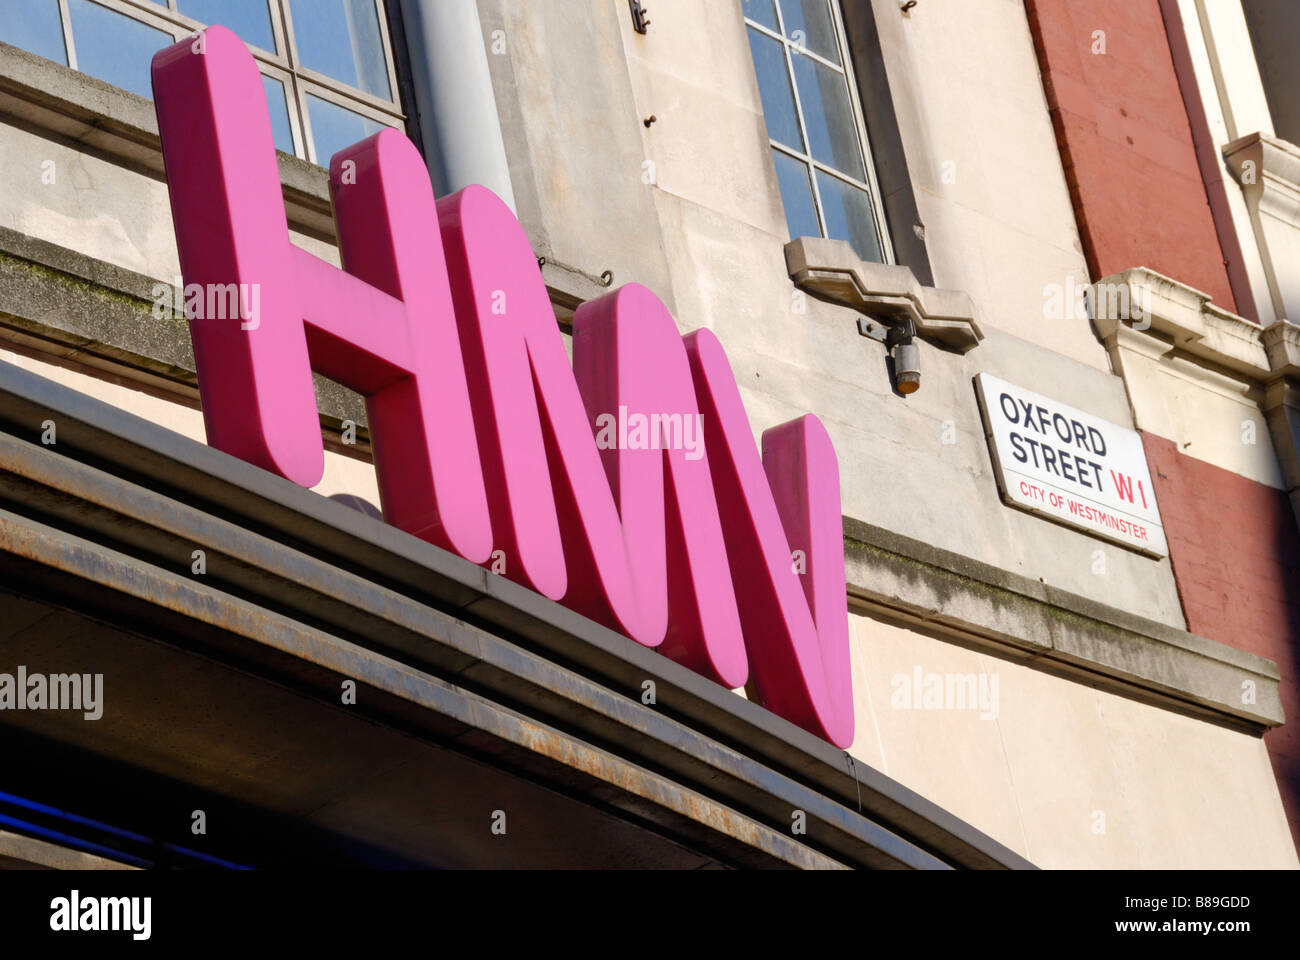 HMV record shop sign in Oxford Street London England Banque D'Images